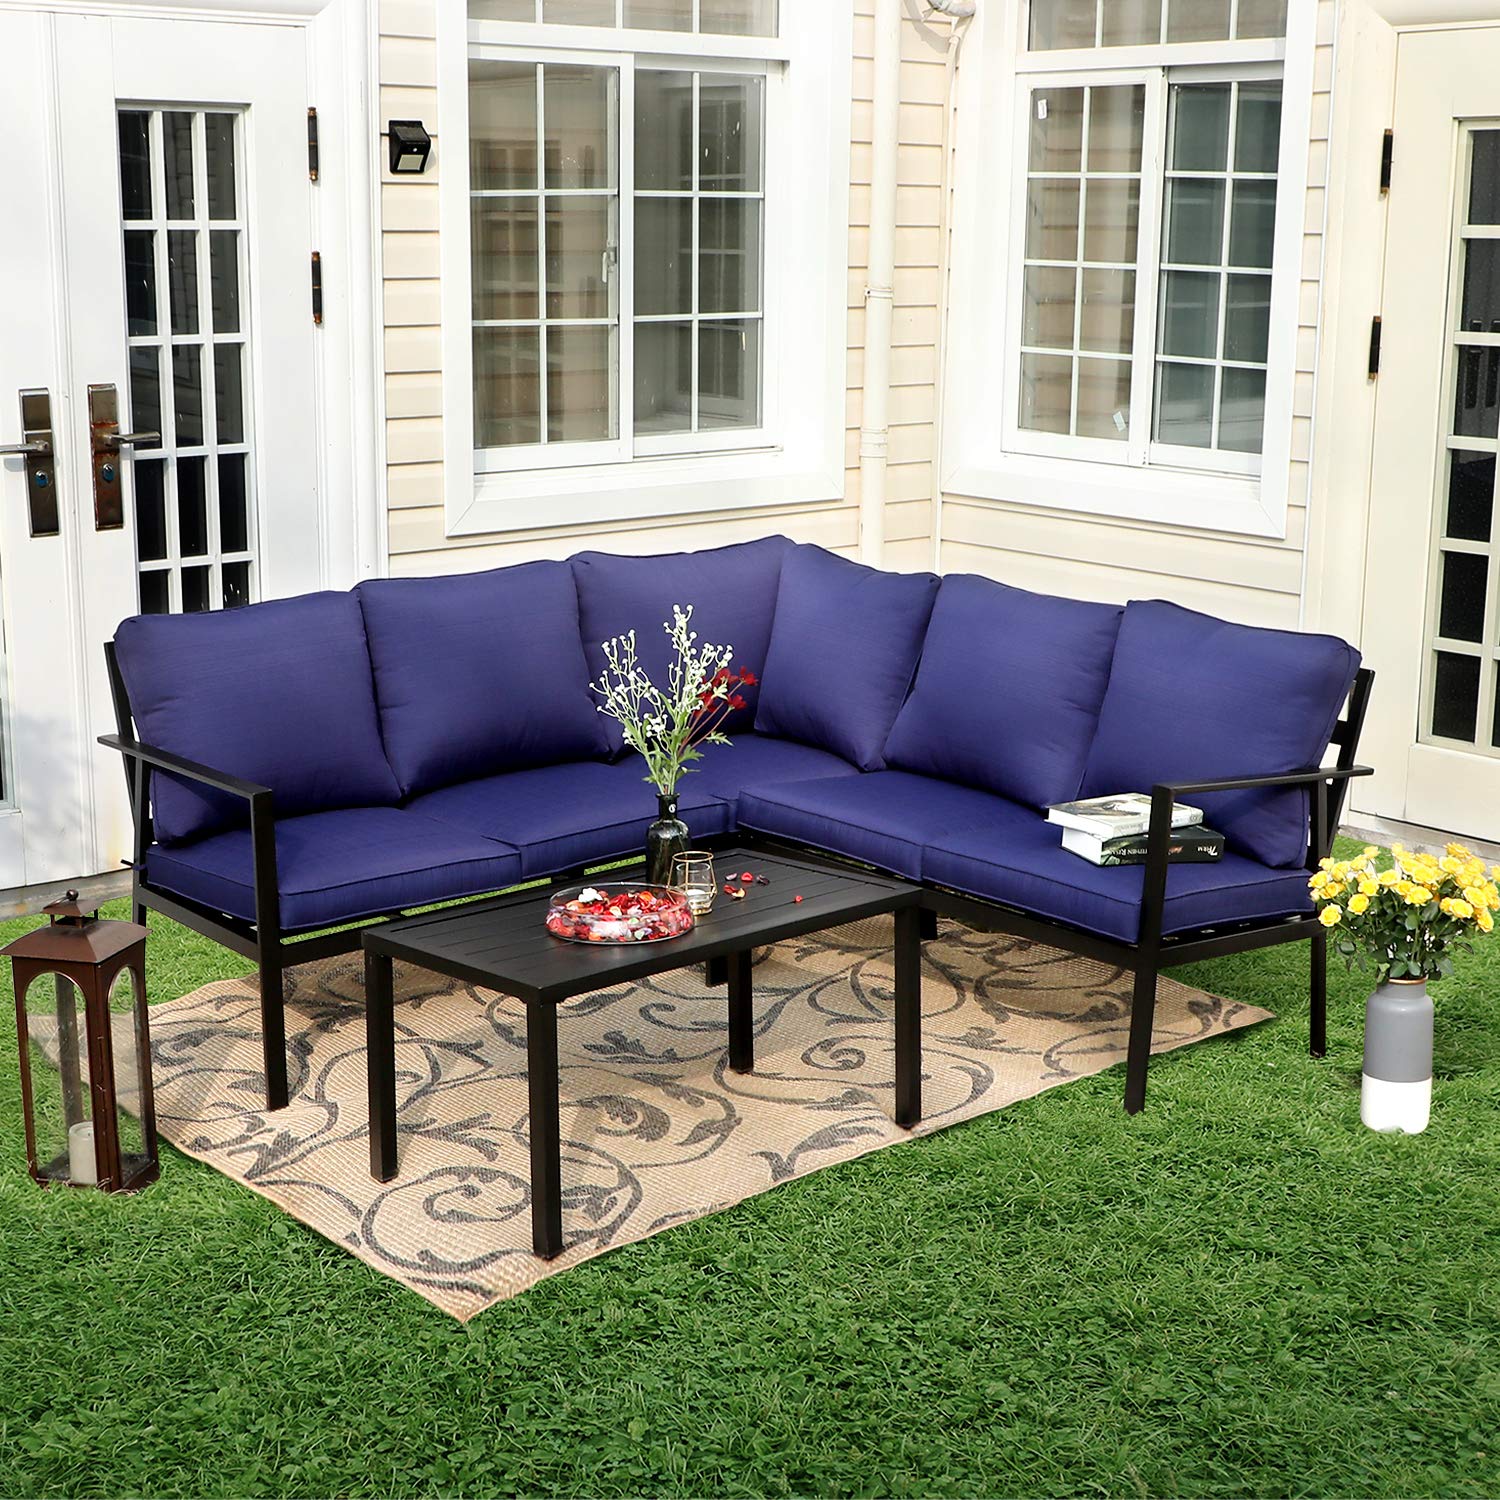 Phi Villa 5 Seater L-shaped Metal Sectional Conversation Set With Water-repellent Cushions & Coffee Table